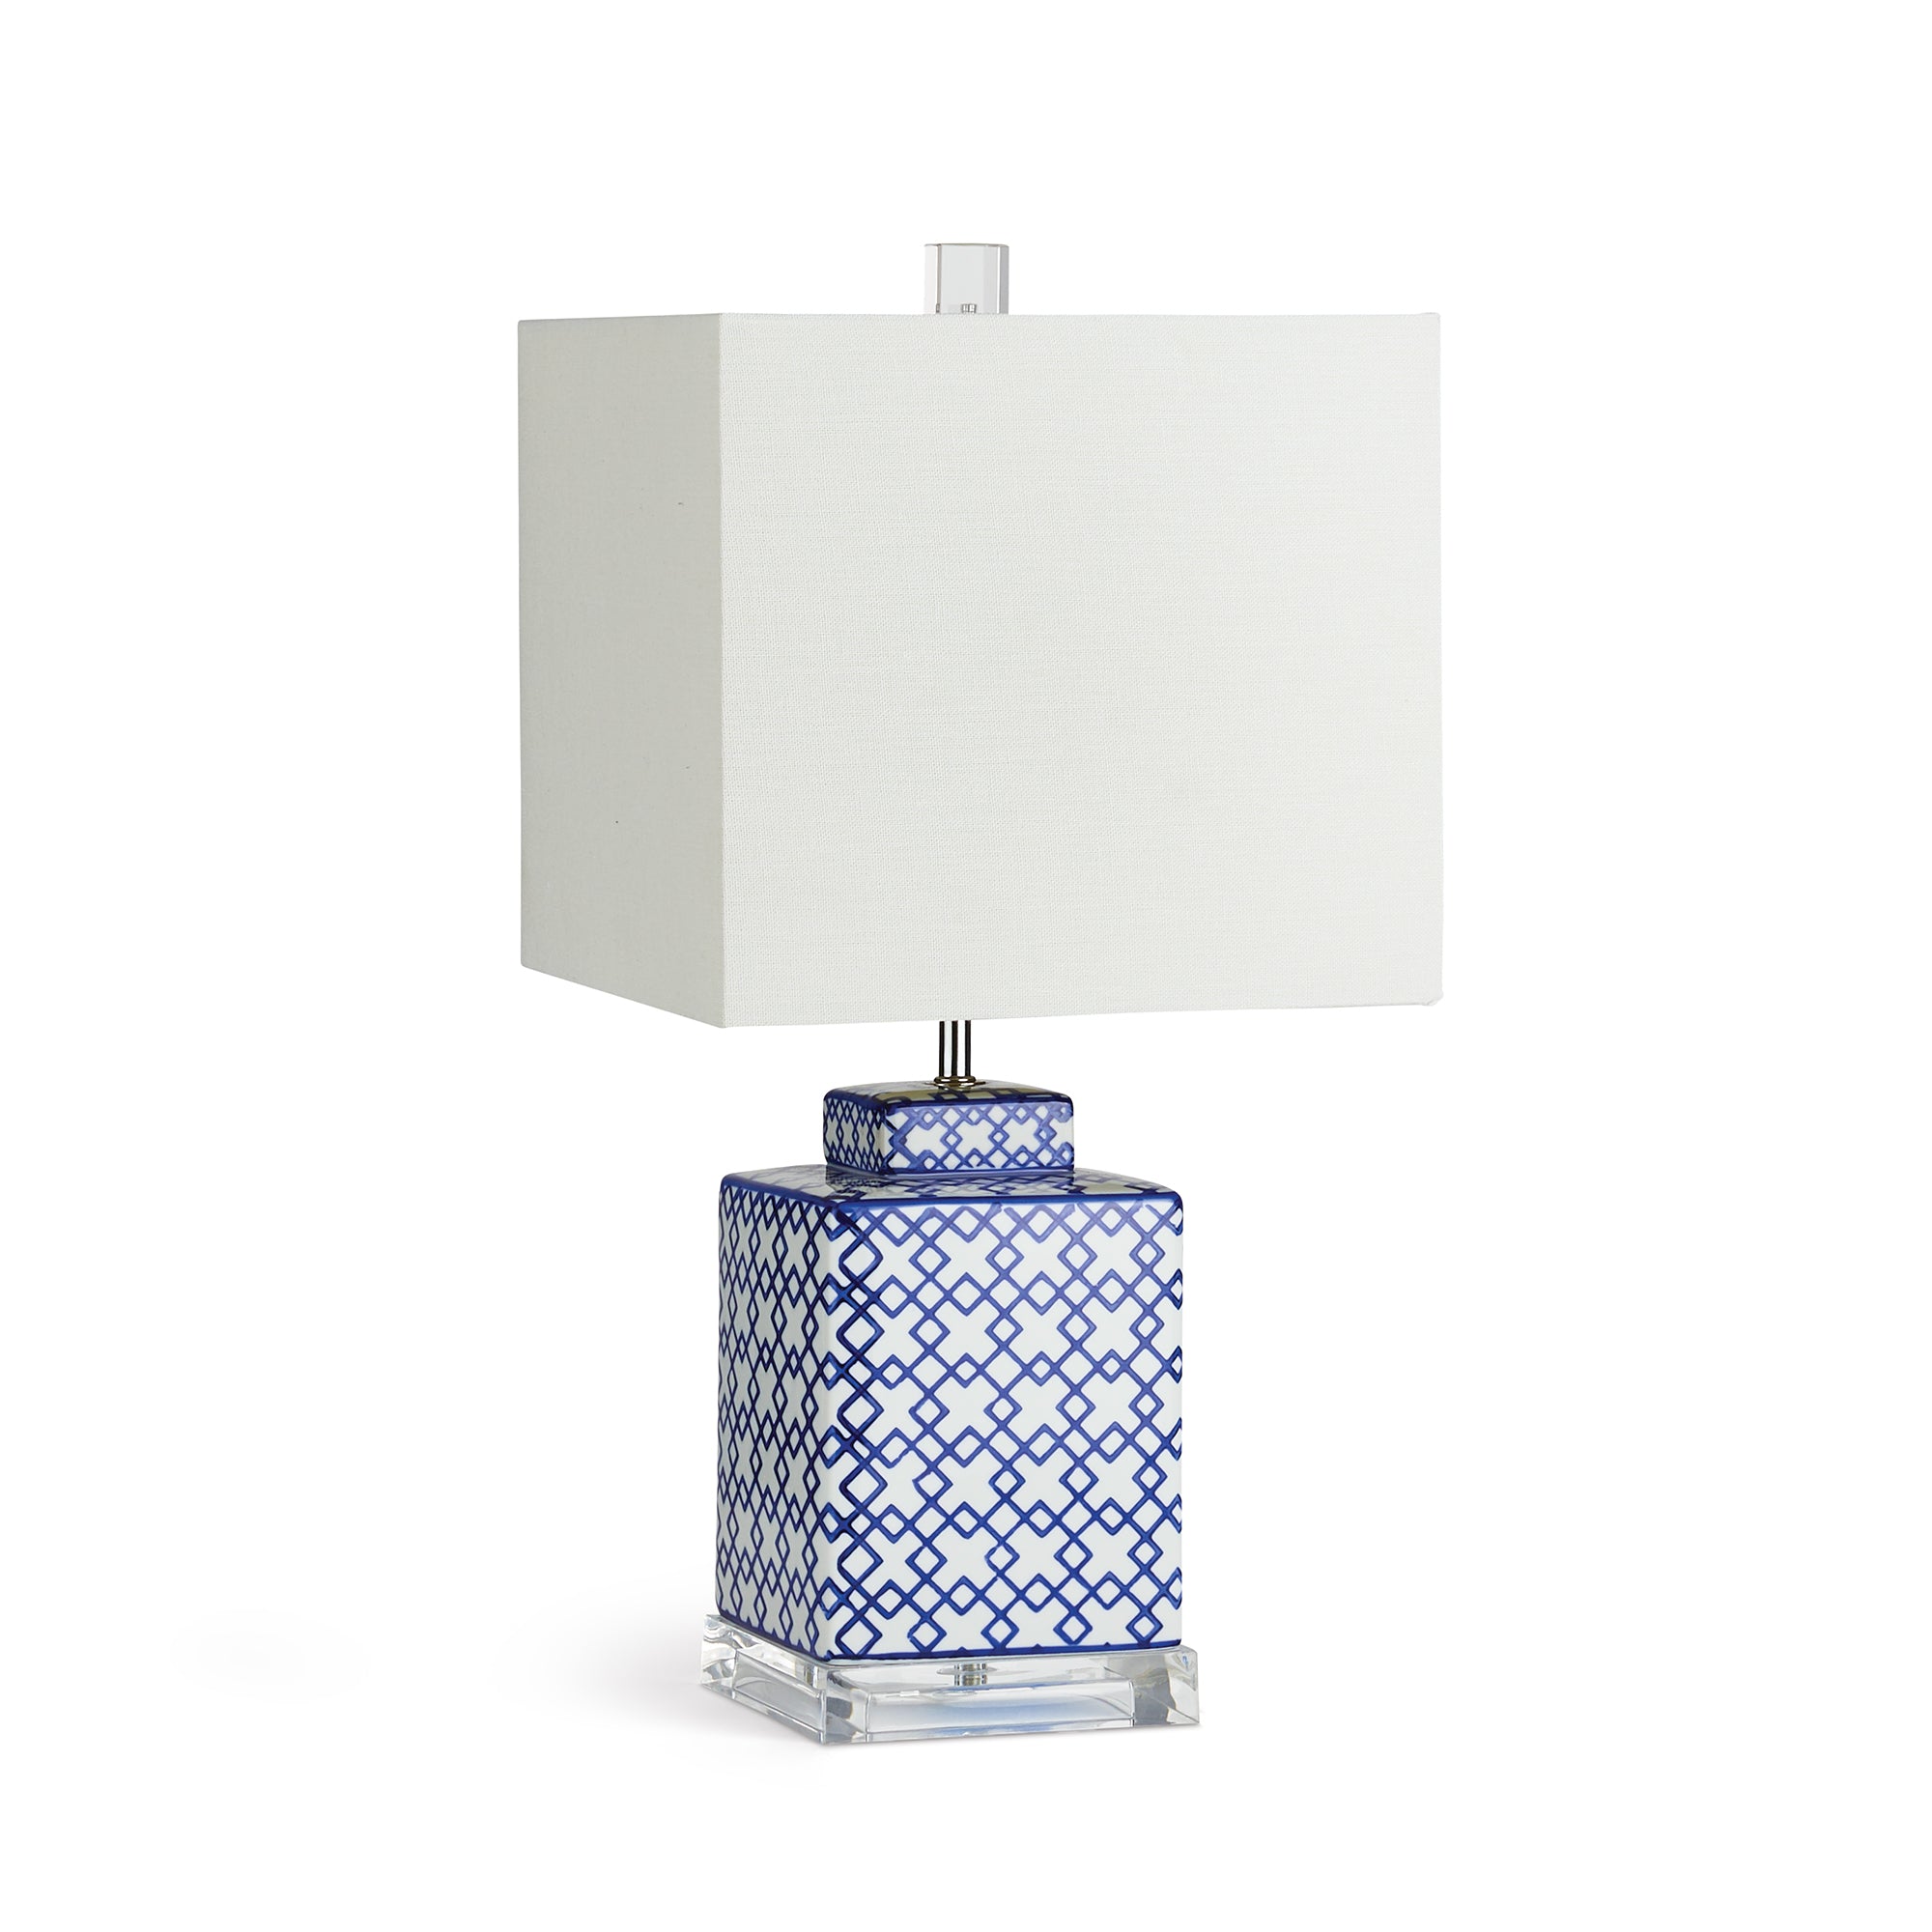 With a bold pattern and square shape, this lamp is a handsome choice for any space. On a side table, console or shelf, a stunning way to lighten up the room. Amethyst Home provides interior design, new construction, custom furniture, and area rugs in the Austin metro area.